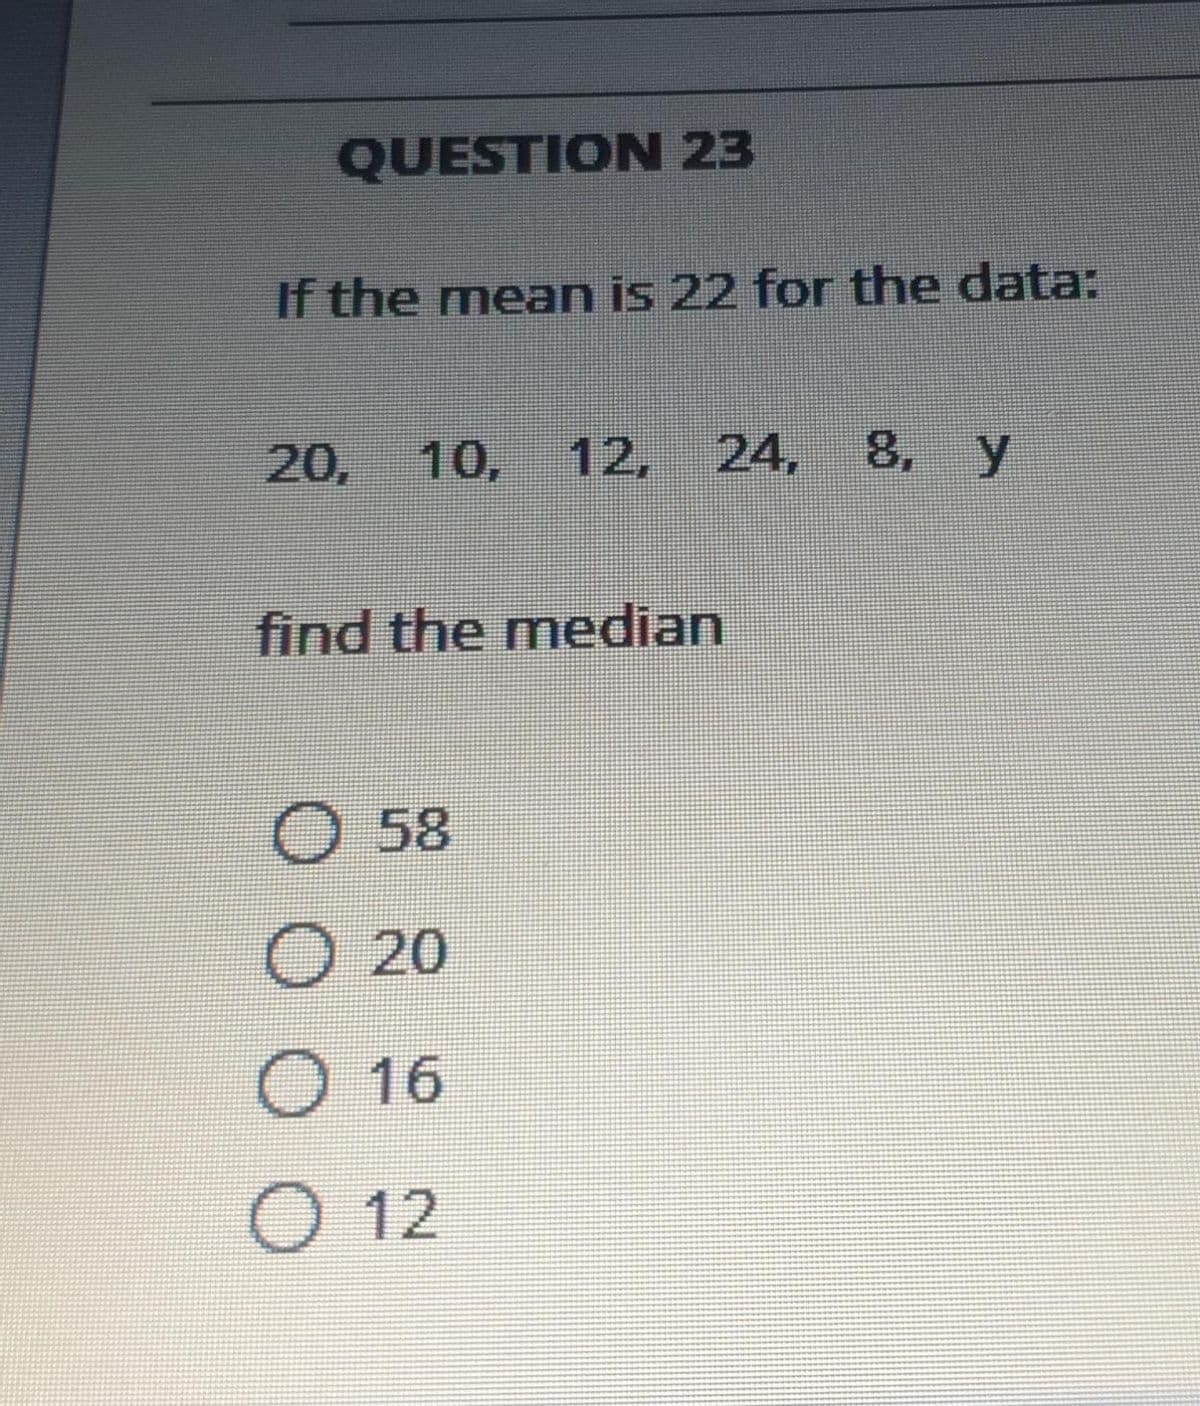 QUESTION 23
If the mean is 22 for the data:
20,
10, 12,
24,
8, y
find the median
O 58
O 20
O 16
O 12
